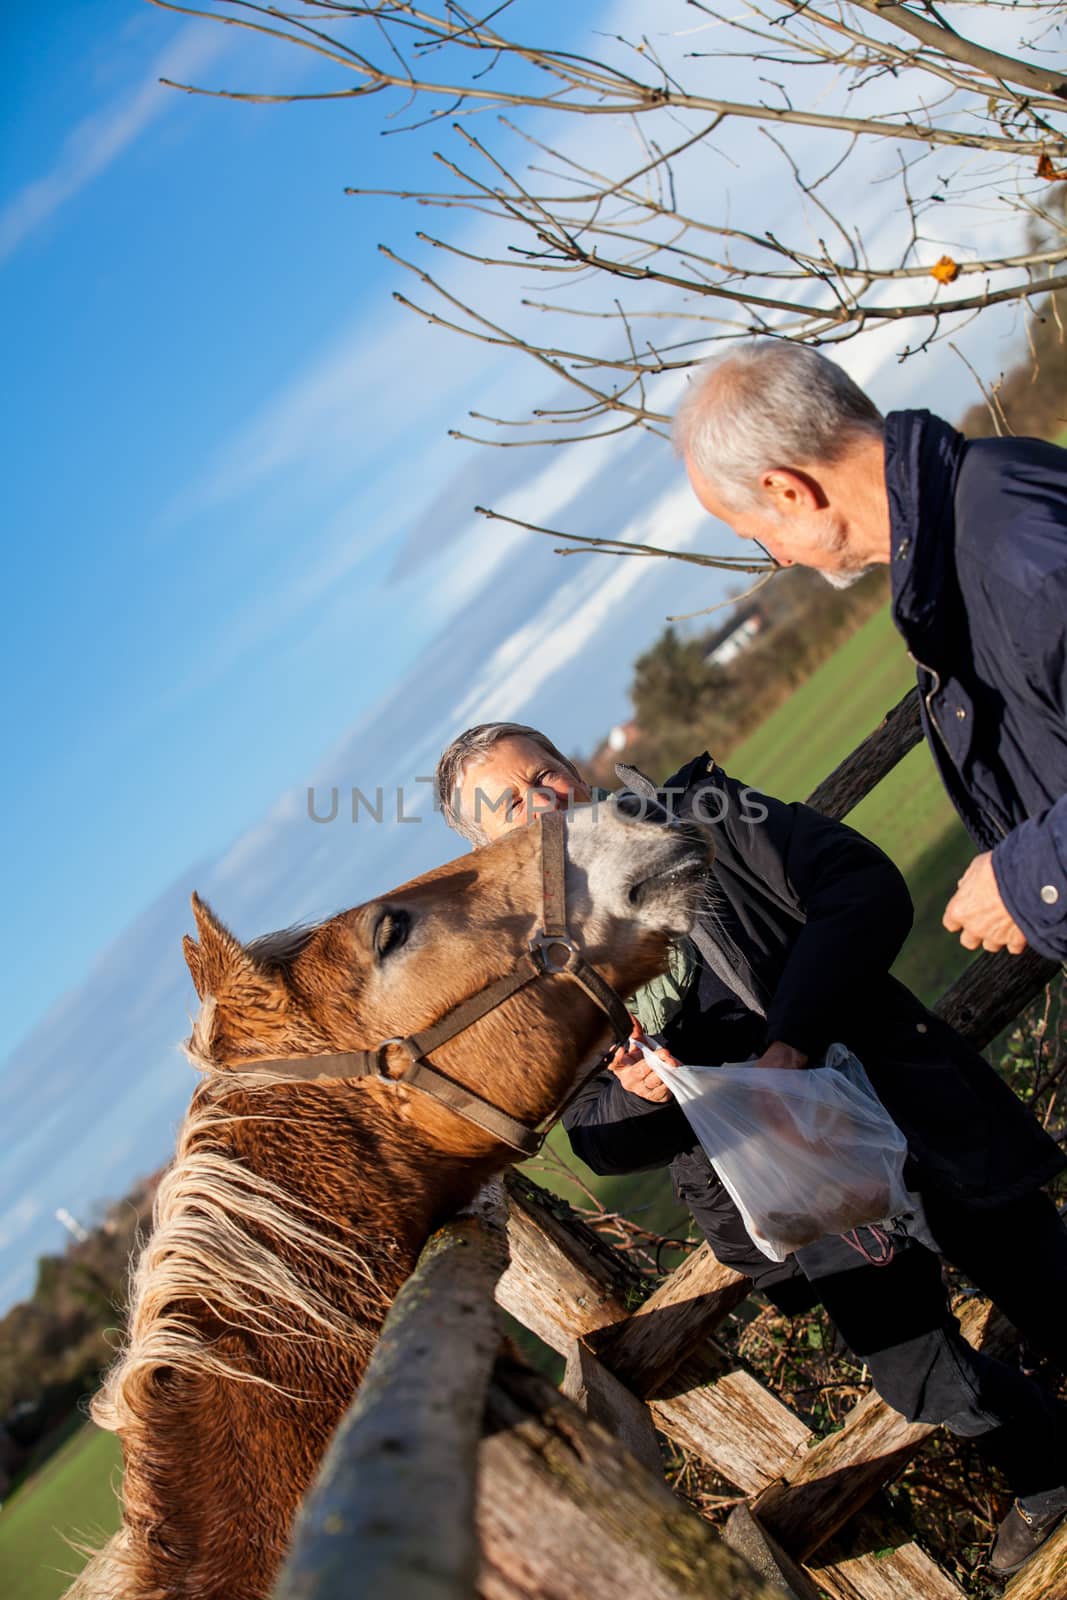 Elderly couple laughing and having fun petting a horse in a paddock on a cold sunny winter day as they enjoy the freedom of their retirement